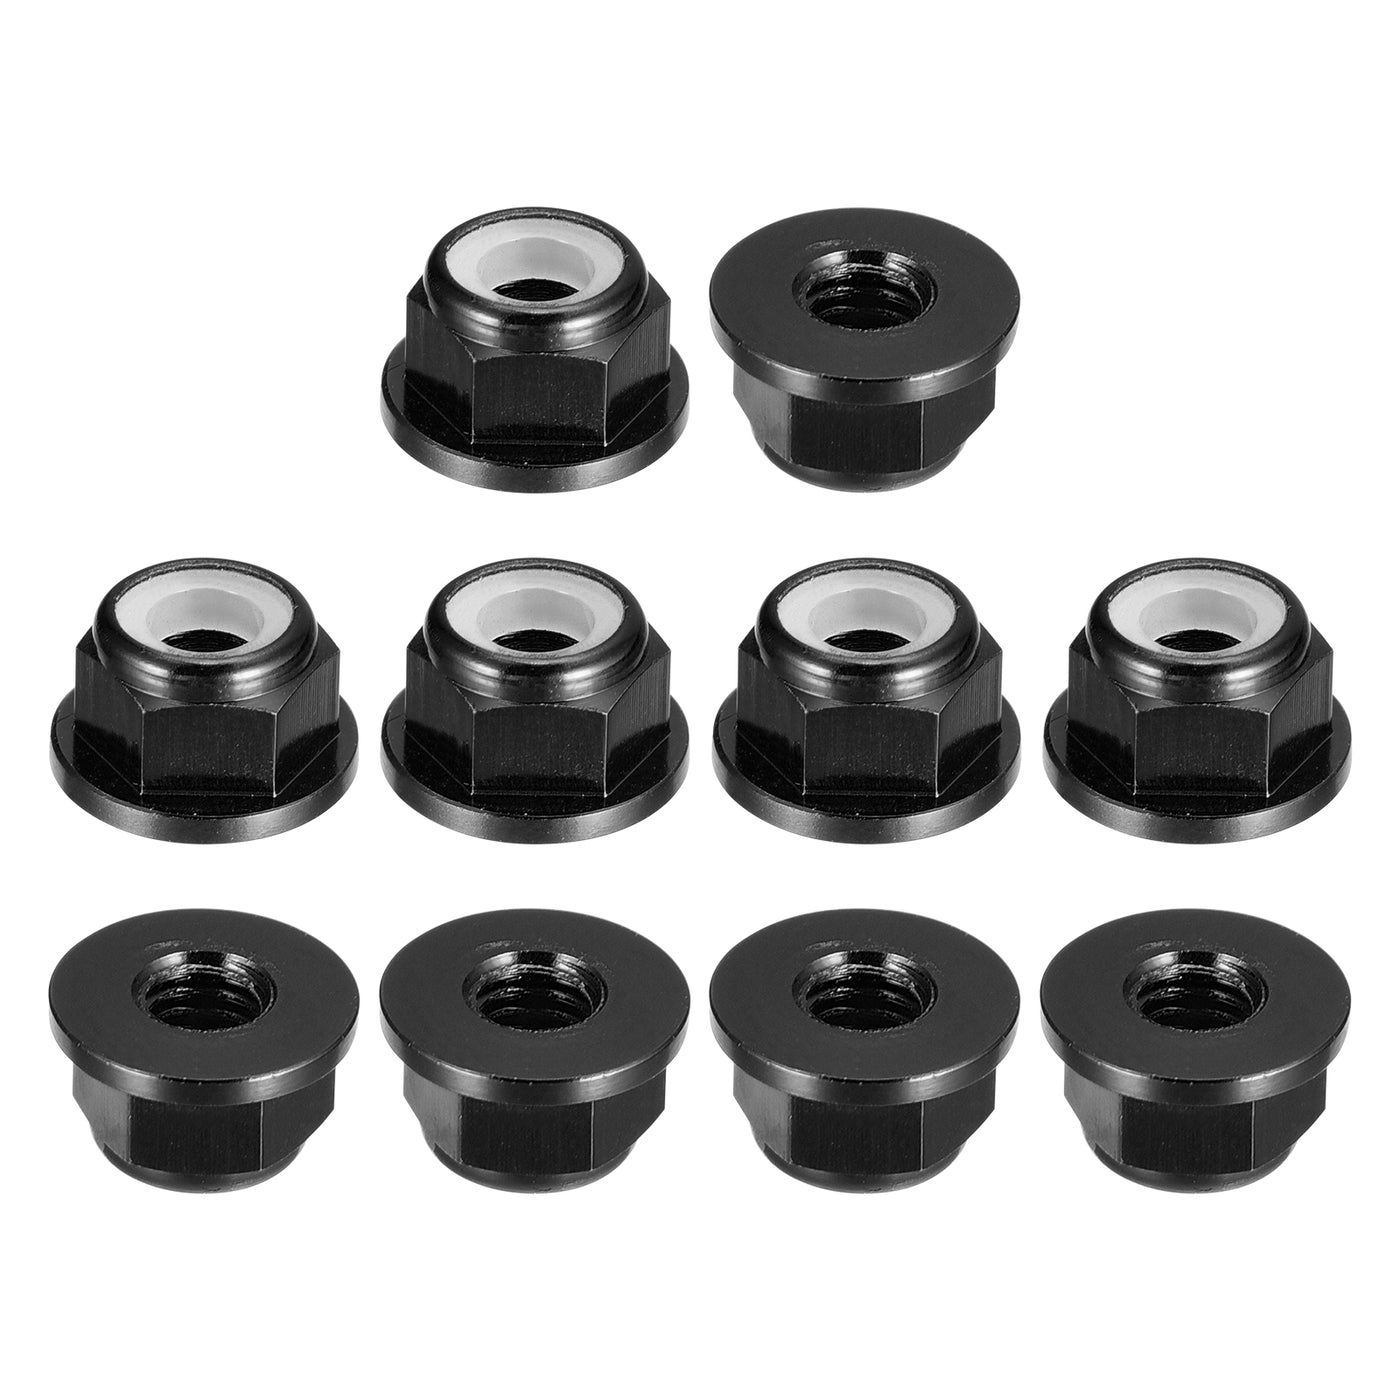 uxcell Uxcell Nylon Insert Hex Lock Nuts, 10pcs - M5 x 0.8mm Aluminum Alloy Self-Locking Nut, Anodizing Flange Lock Nut for Fasteners (Black)